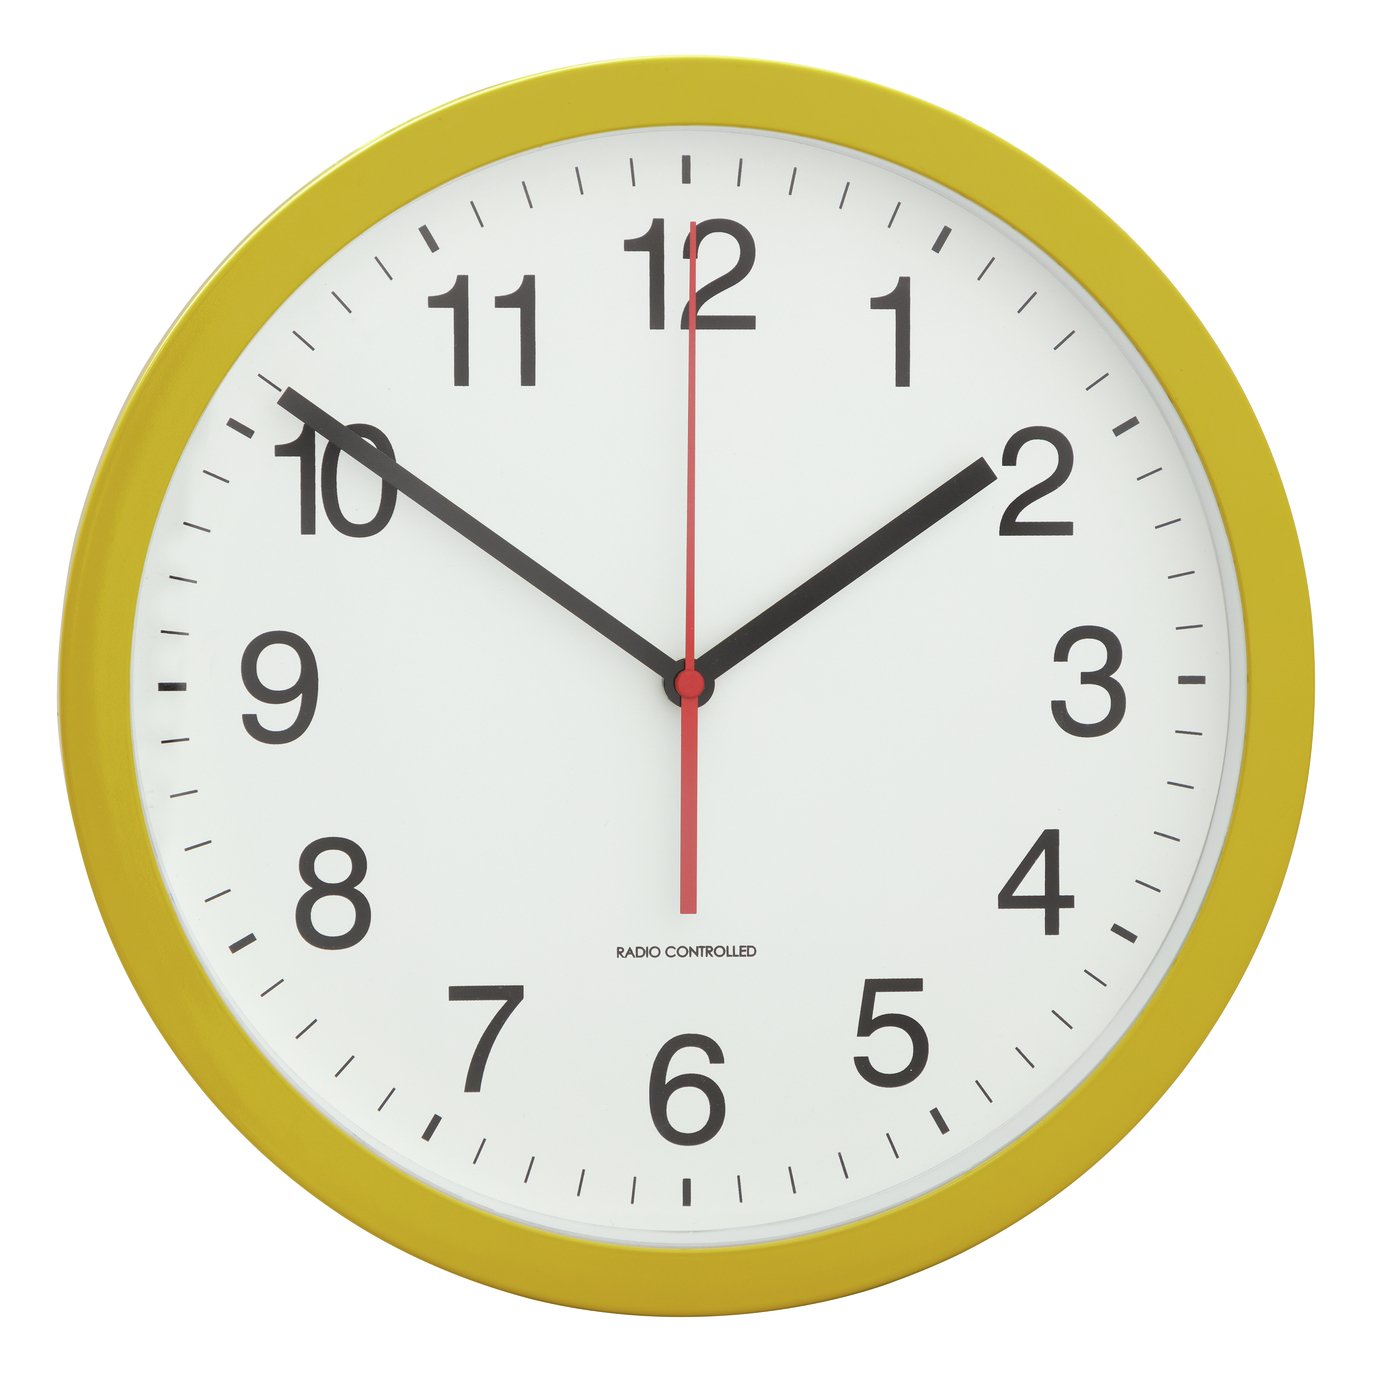 Argos Home Radio Controlled Wall Clock Review